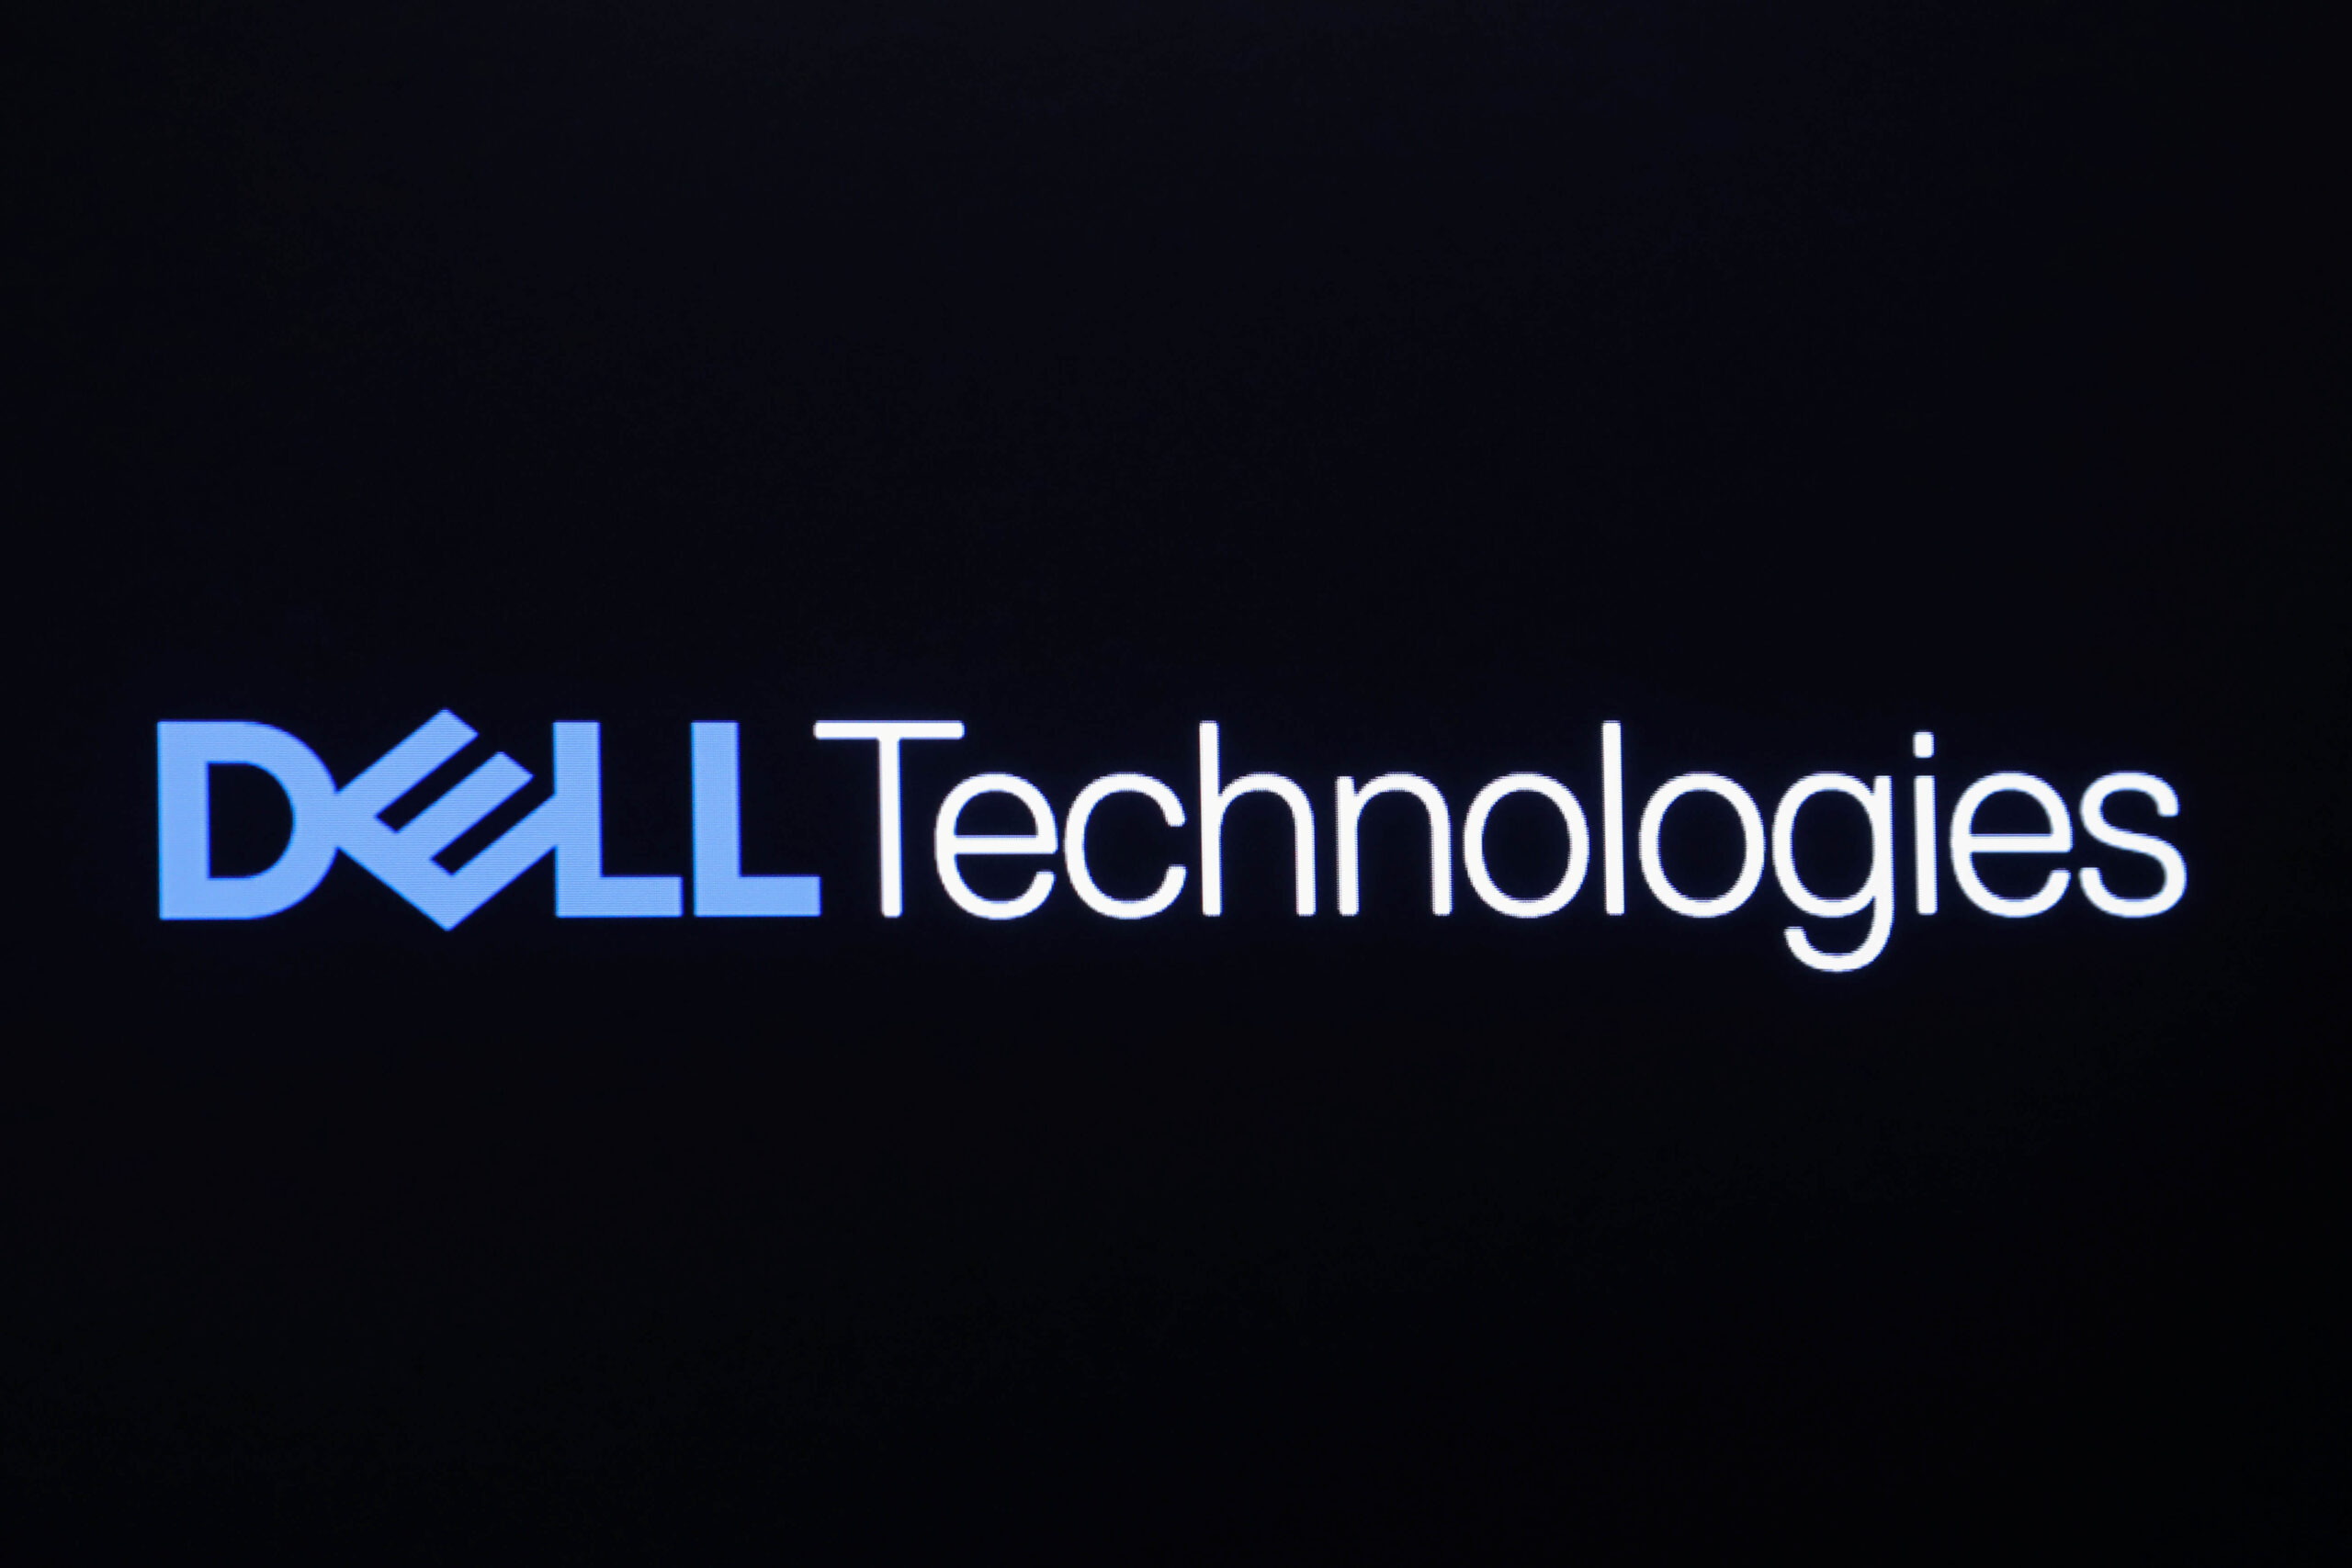 “Dell’s Stock Soars to All-Time High on Impressive AI Integration and Strong Forecasts”